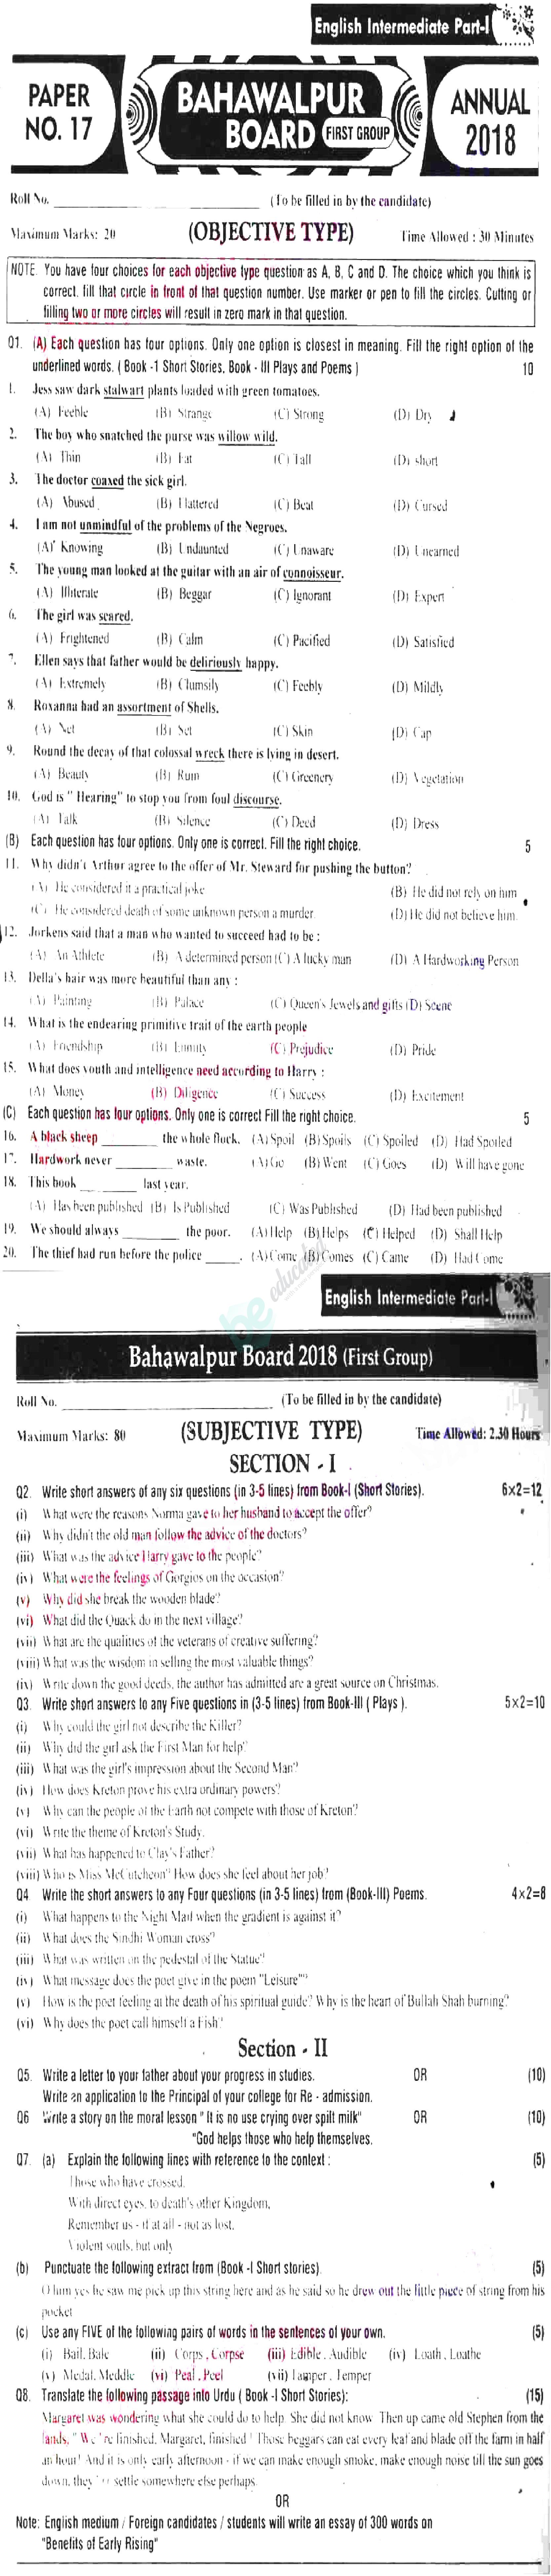 English 11th class Past Paper Group 1 BISE Bahawalpur 2018